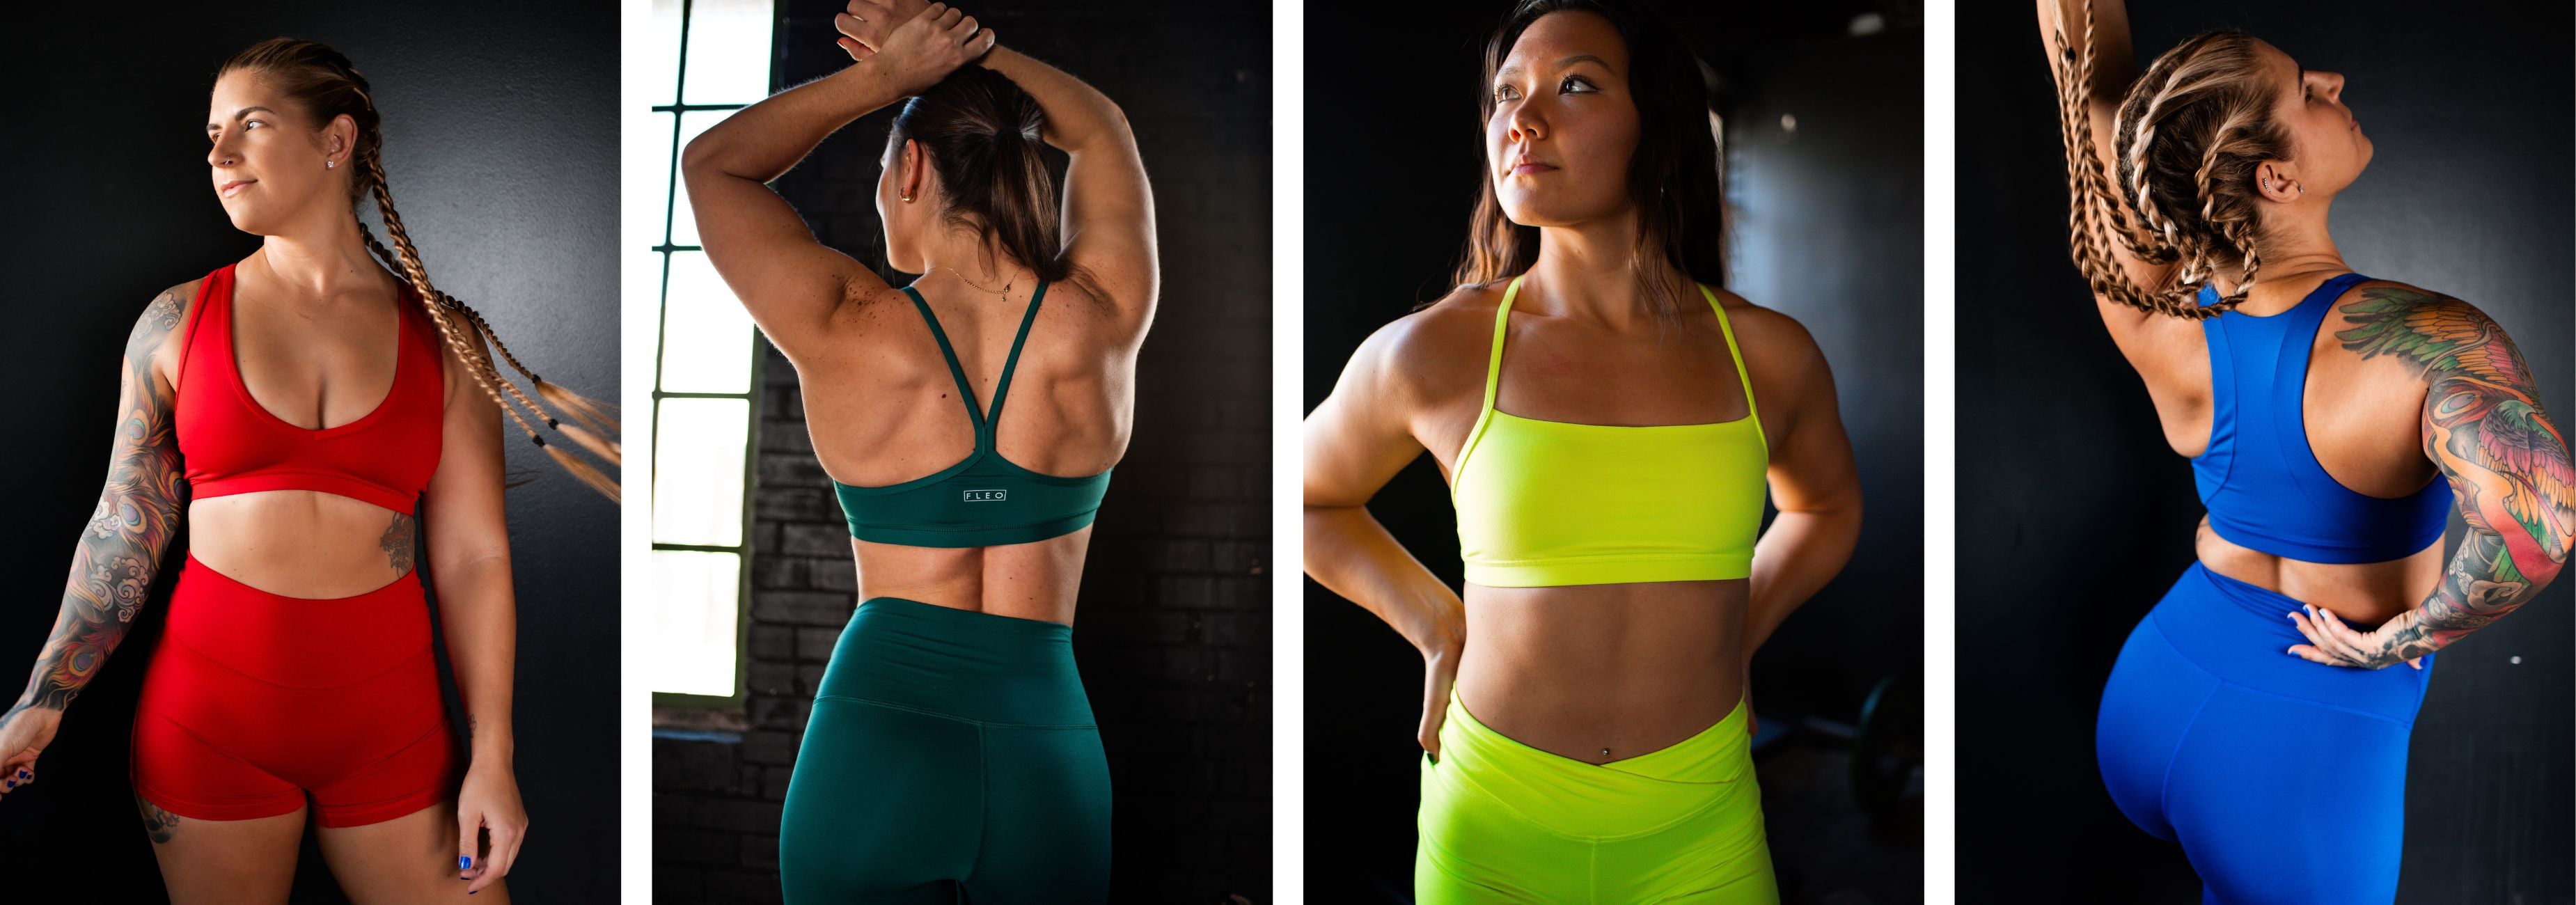 Athletic Sports Bras - High, Medium and Low Support Available